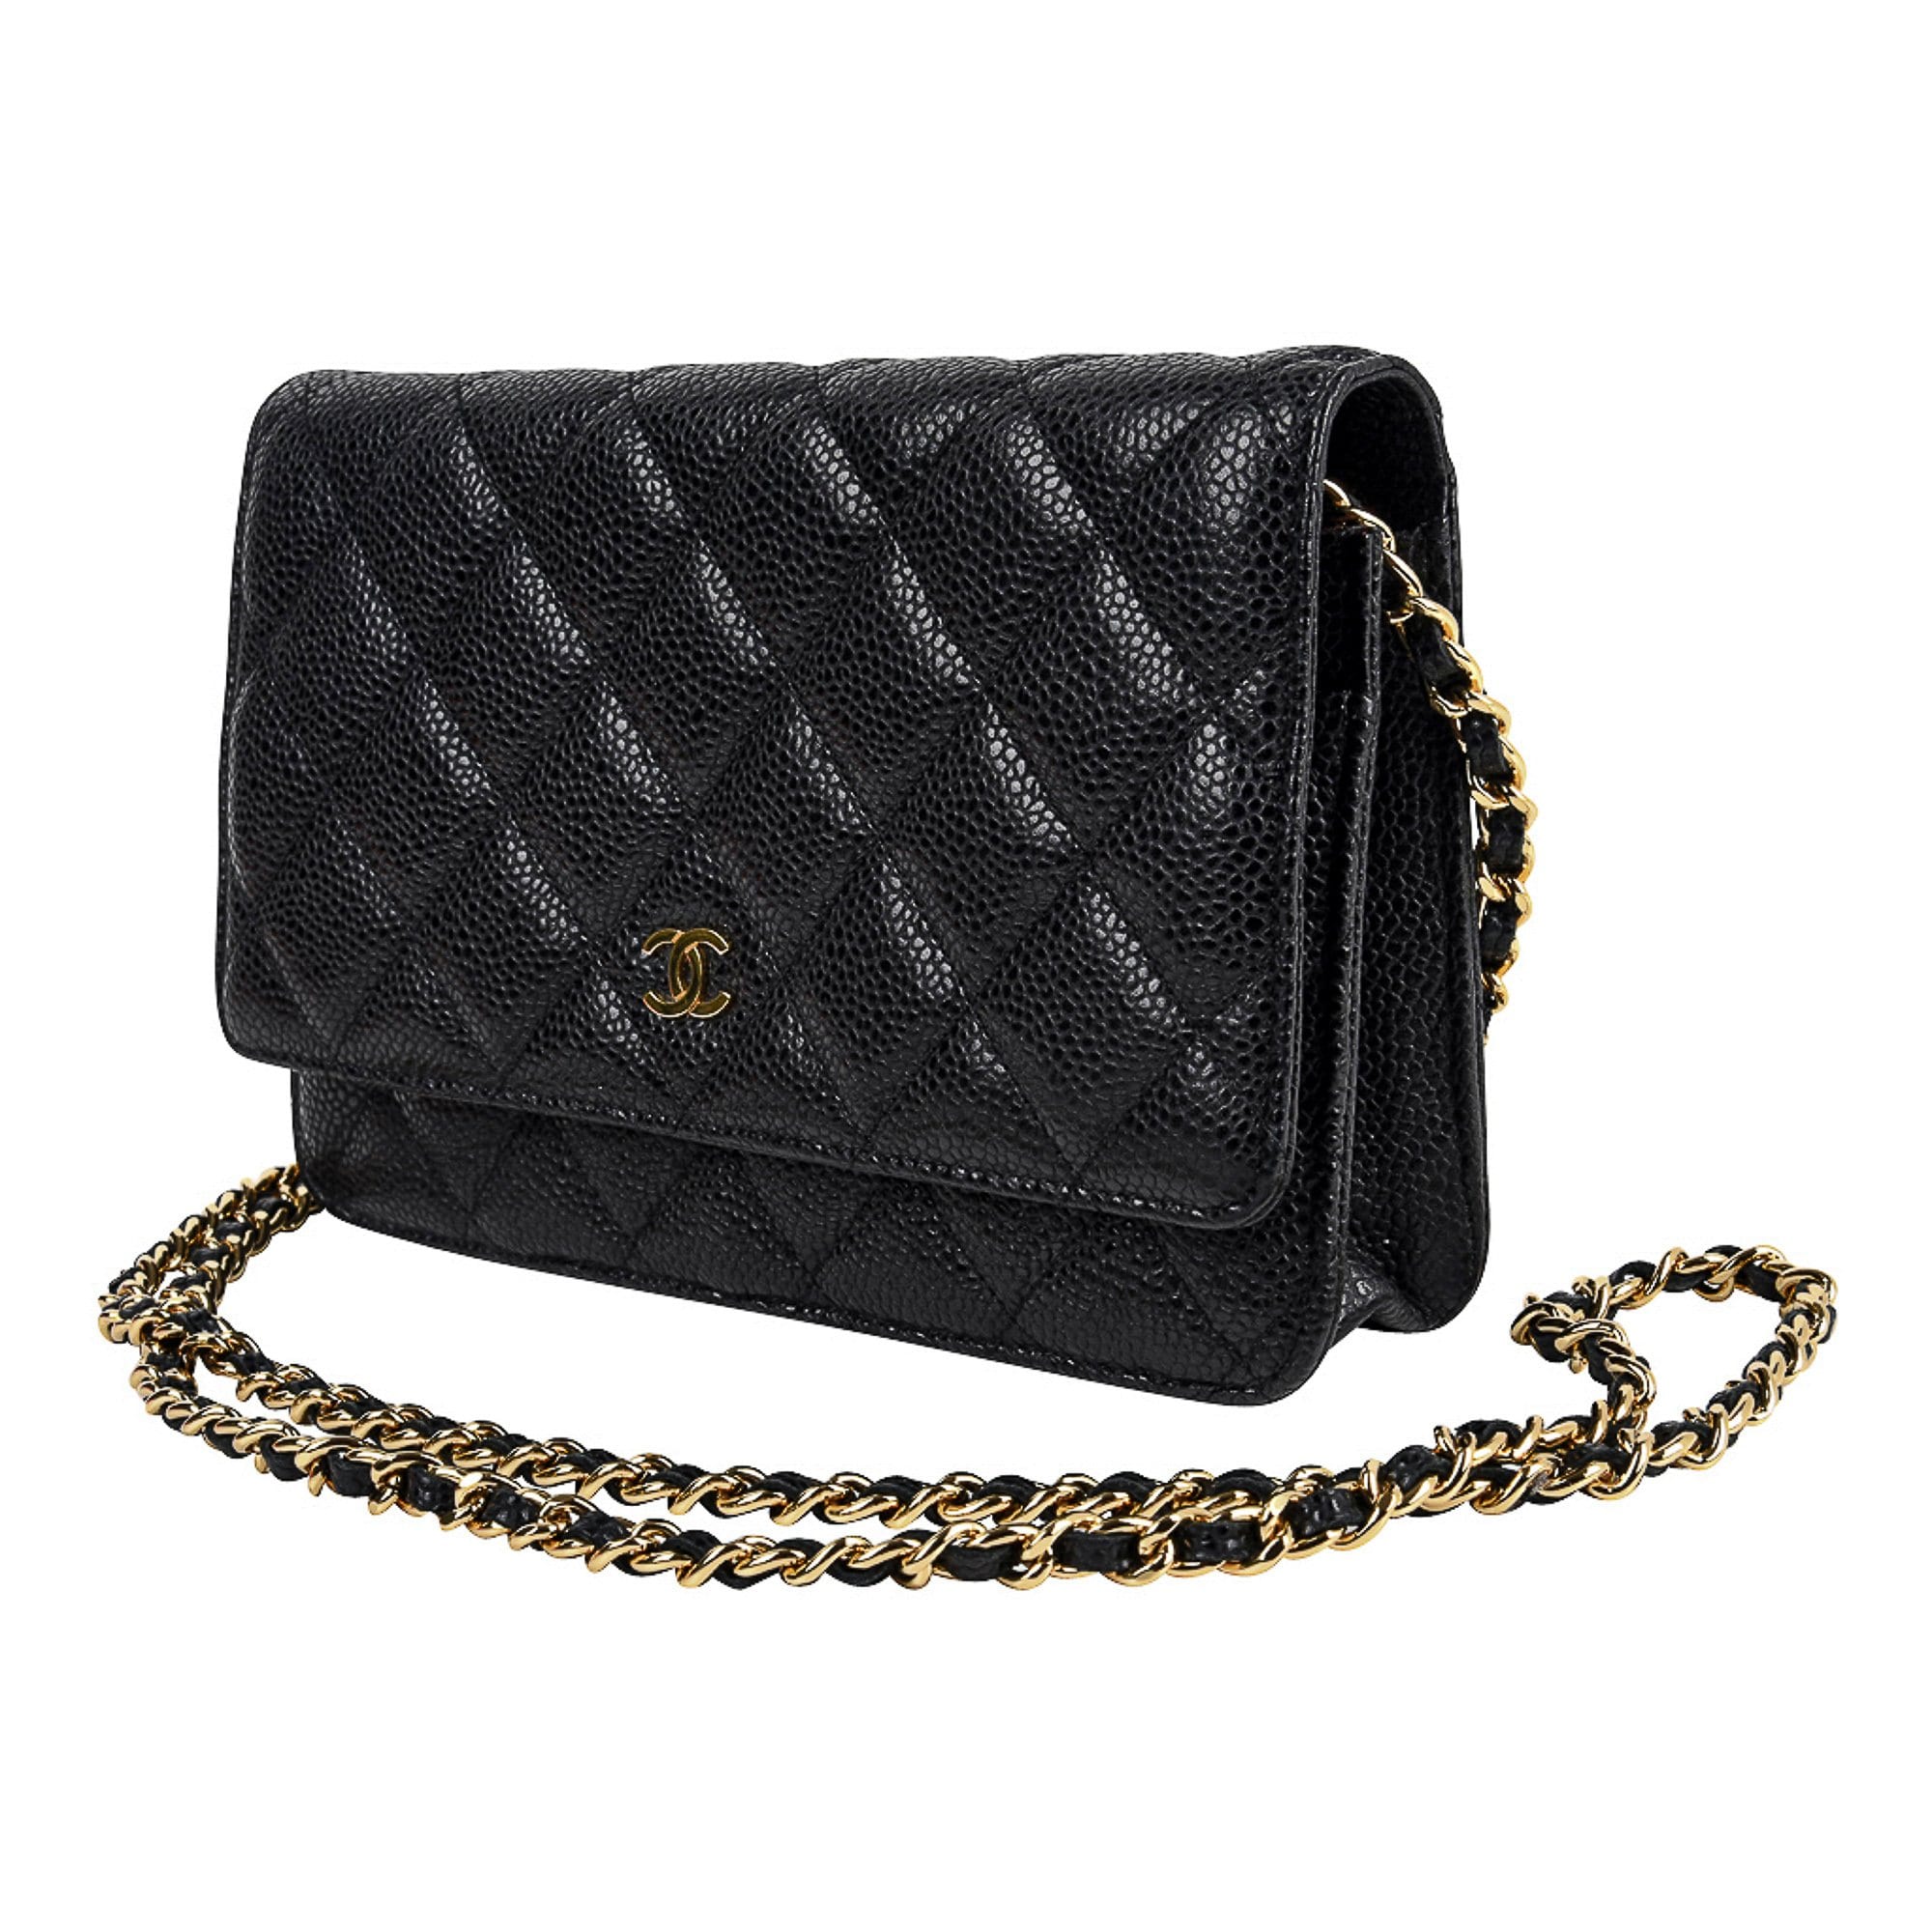 Chanel Wallet on Chain WOC Caviar Black Quilted Leather Bag w/Box ...